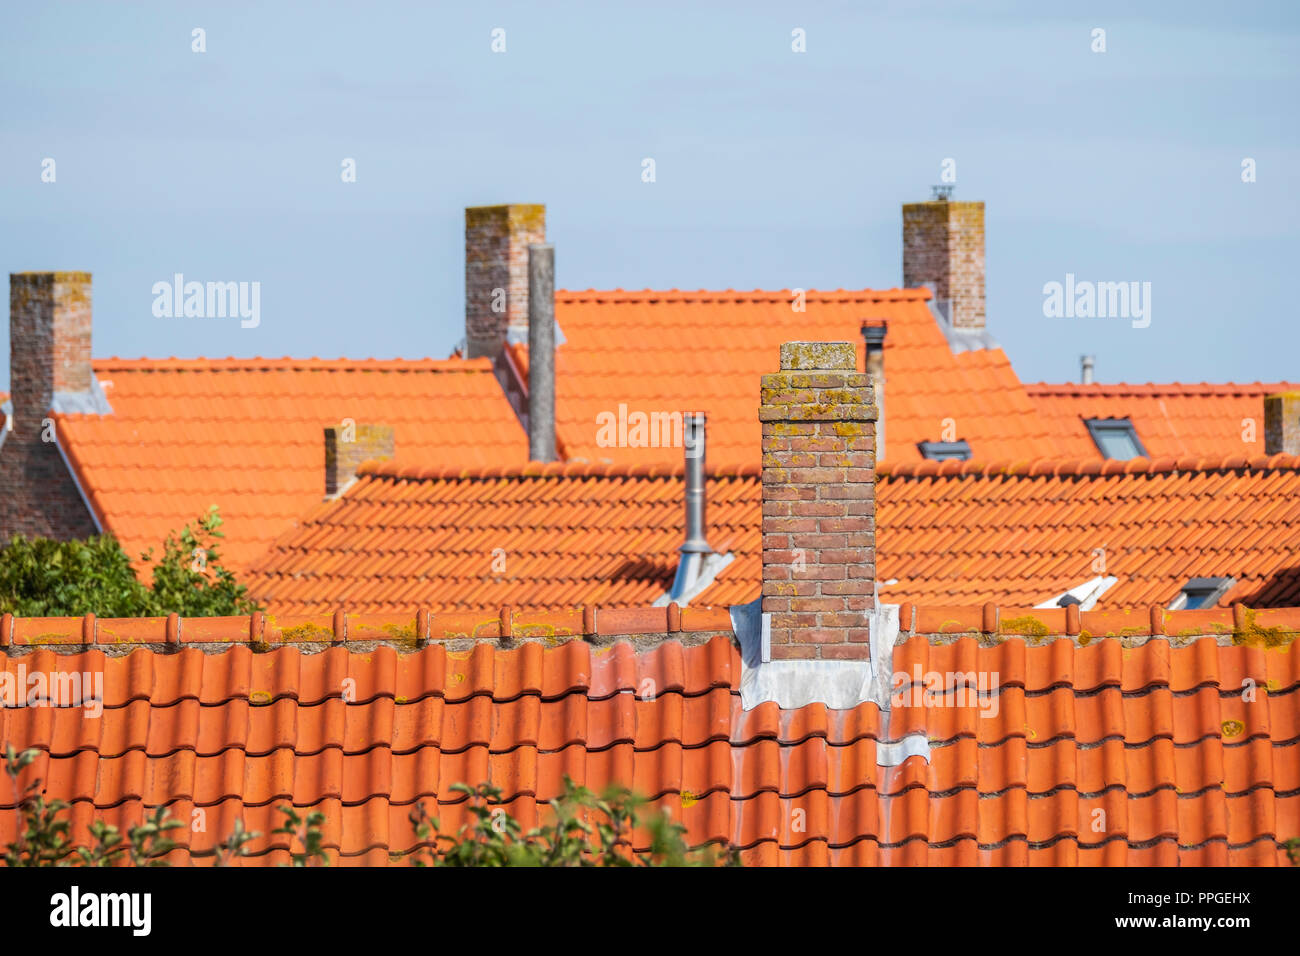 stone chimneys on the roofs with orange roof tiles against a blue sky in an old neighborhood Stock Photo